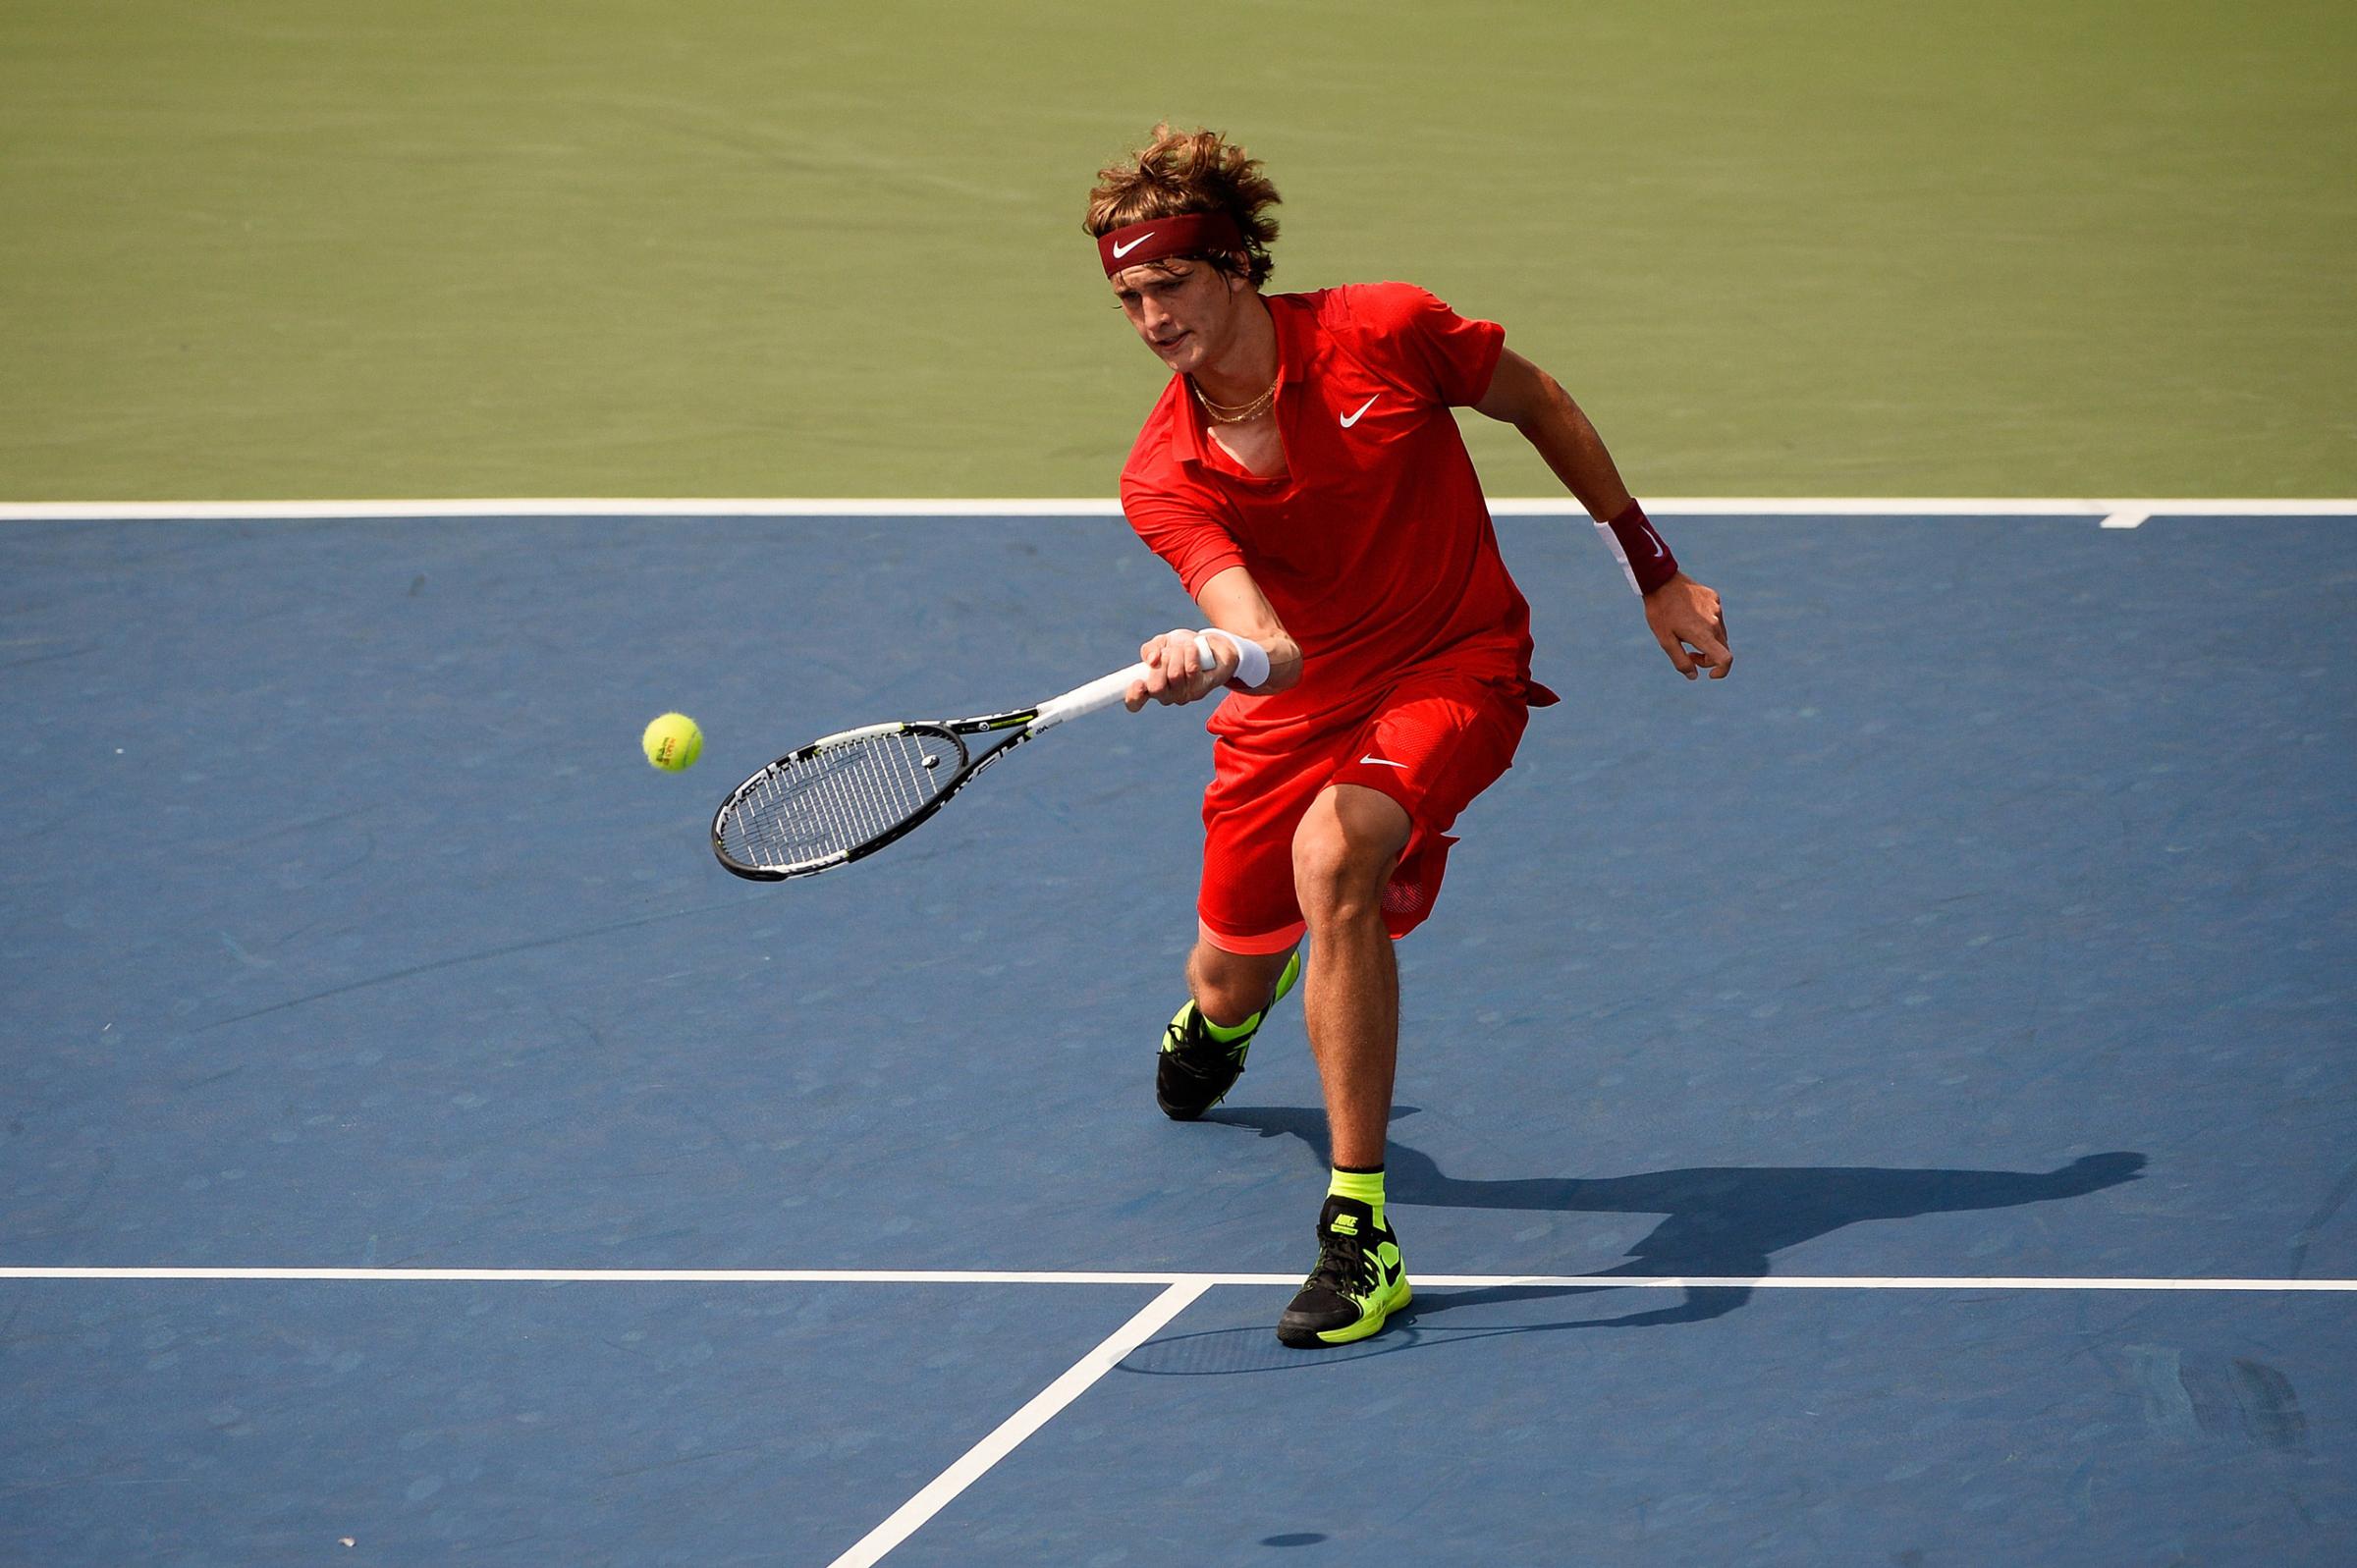 NEW YORK, NY - SEPTEMBER 01: Alexander Zverev of Germany returns a shot against Philipp Kohlschreiber of Germany during their Men's Singles First Round match on Day Two of the 2015 US Open at the USTA Billie Jean King National Tennis Center on September 1, 2015 in the Flushing neighborhood of the Queens borough of New York City. (Photo by Alex Goodlett/Getty Images)NEW YORK, NY - SEPTEMBER 01: Alexander Zverev of Germany returns a shot against Philipp Kohlschreiber of Germany during their Men's Singles First Round match on Day Two of the 2015 US Open at the USTA Billie Jean King National Tennis Center on September 1, 2015 in the Flushing neighborhood of the Queens borough of New York City. (Photo by Alex Goodlett/Getty Images)